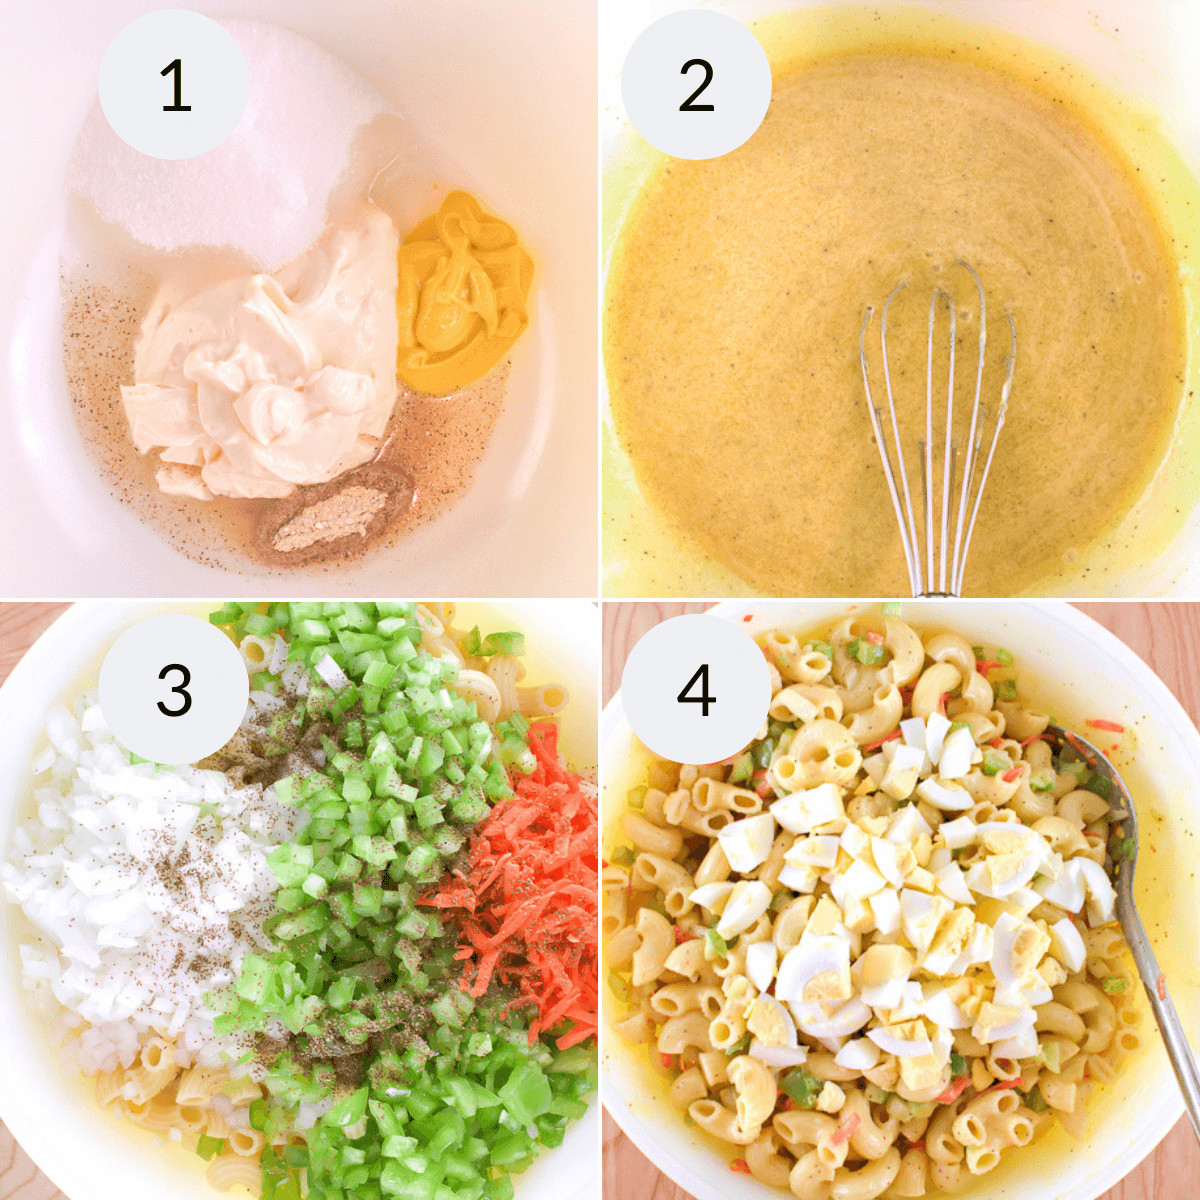 Four-step classic macaroni salad preparation: 1) ingredients in a bowl before mixing 2) ingredients well mixed 3) chopped vegetables added 4) final classic macaroni salad ready